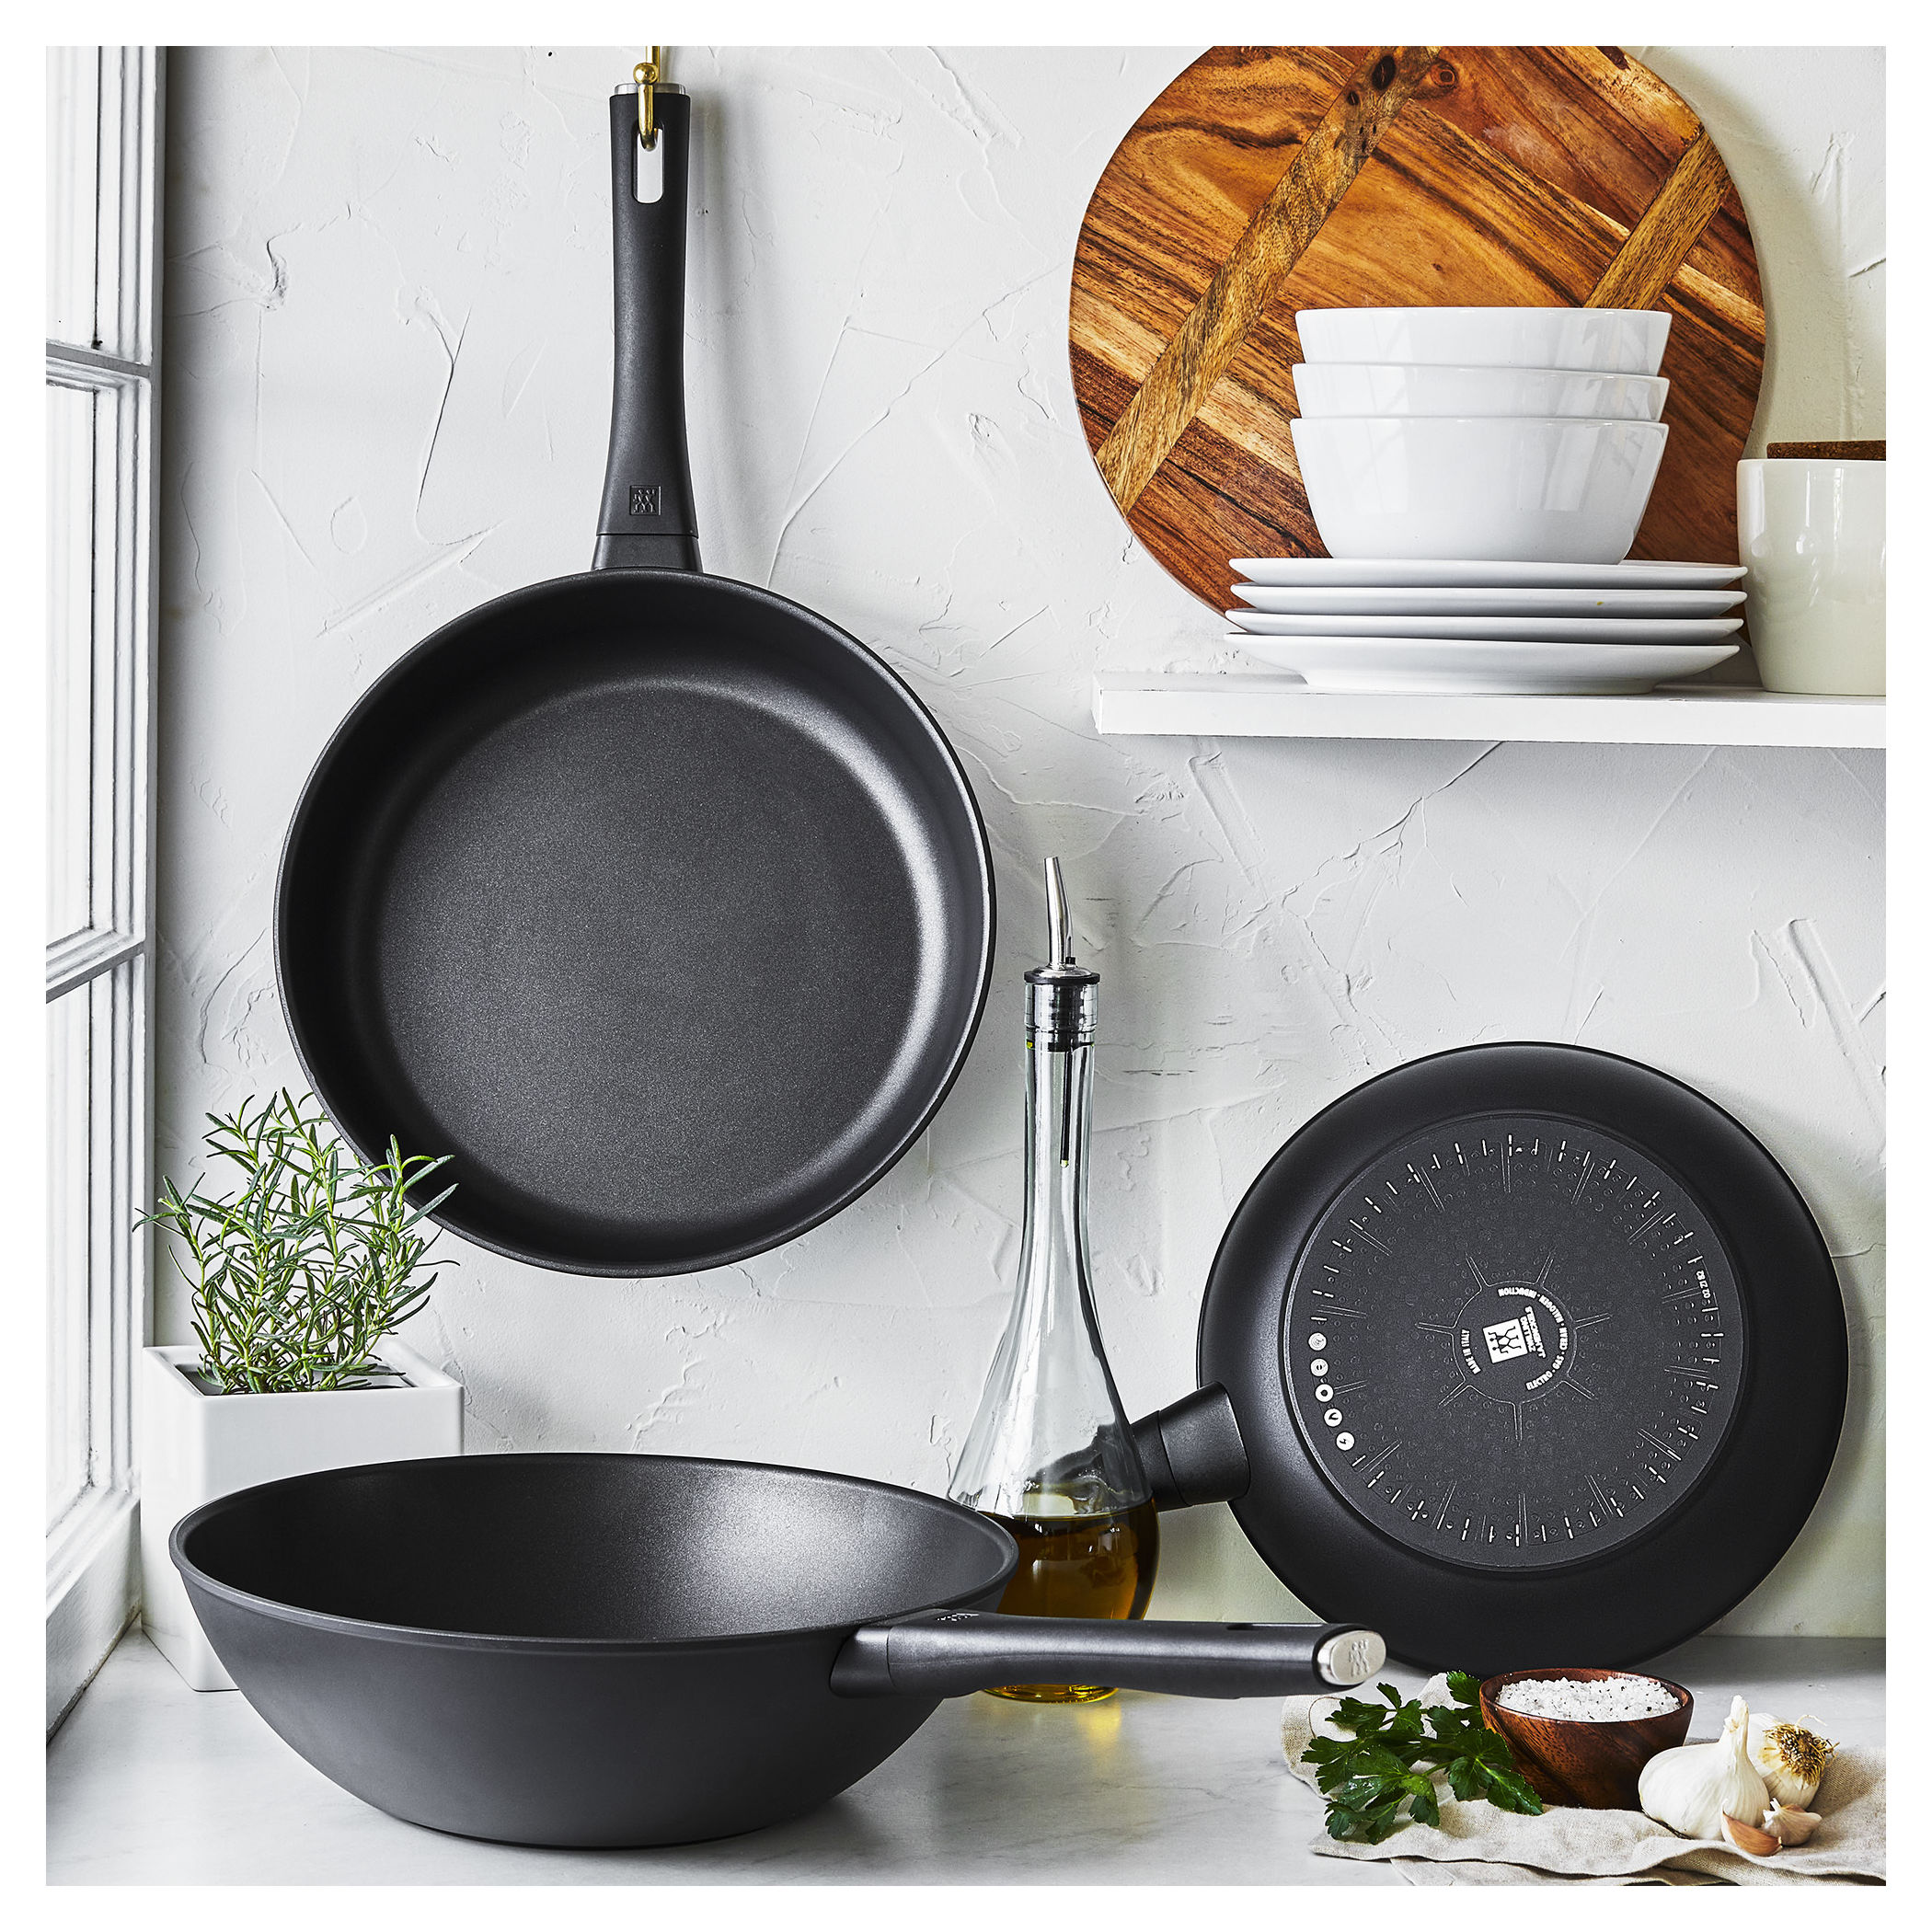 Buy ZWILLING Madura plus Pots and pans set